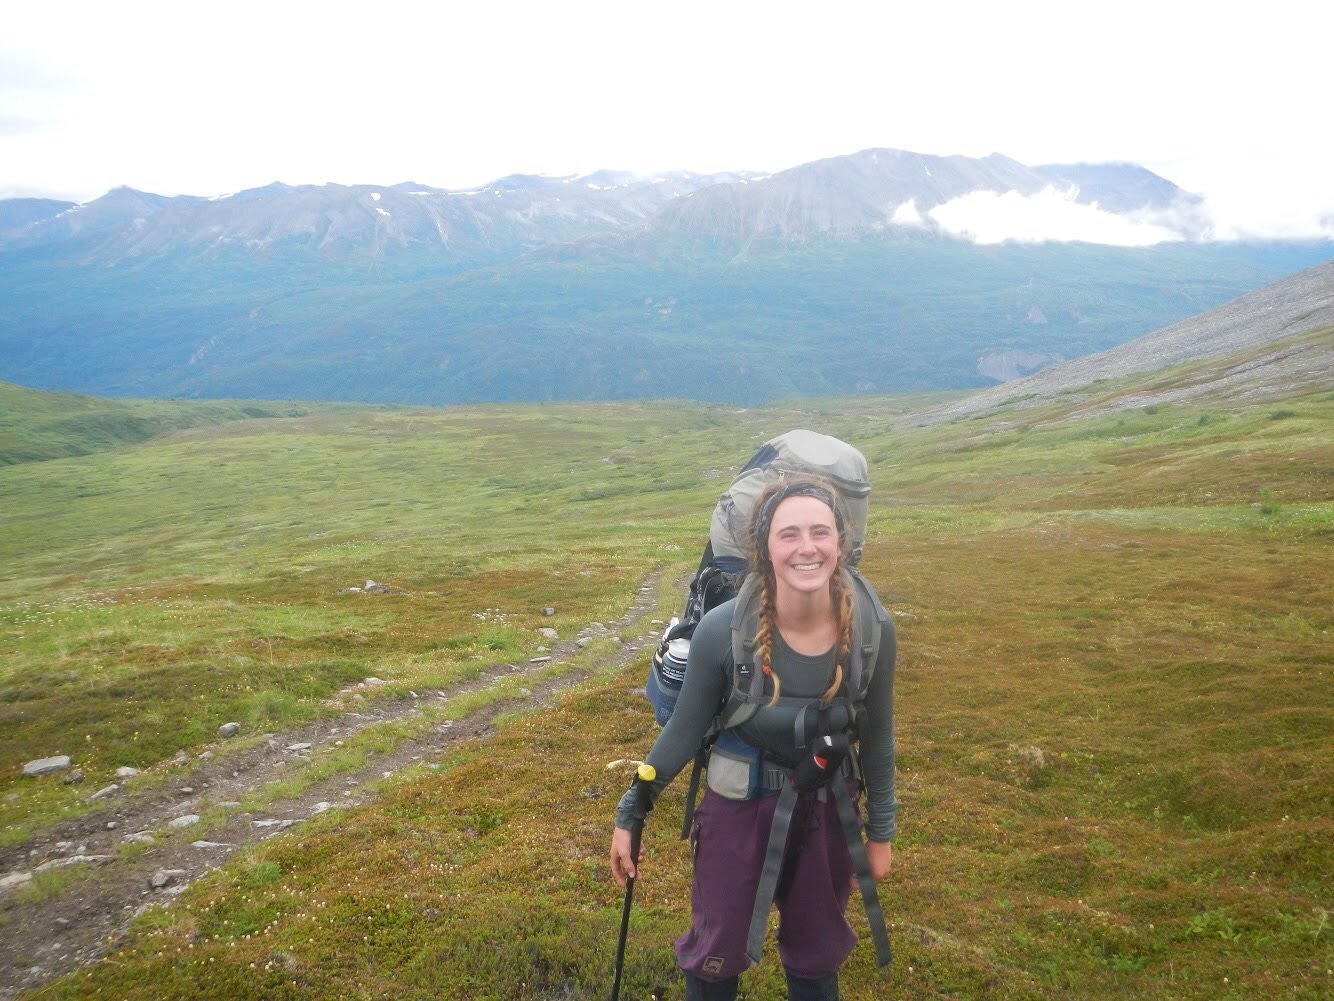 Woman with hair in braids wearing a backpack and smiling next to a trail in Alaska's mountains